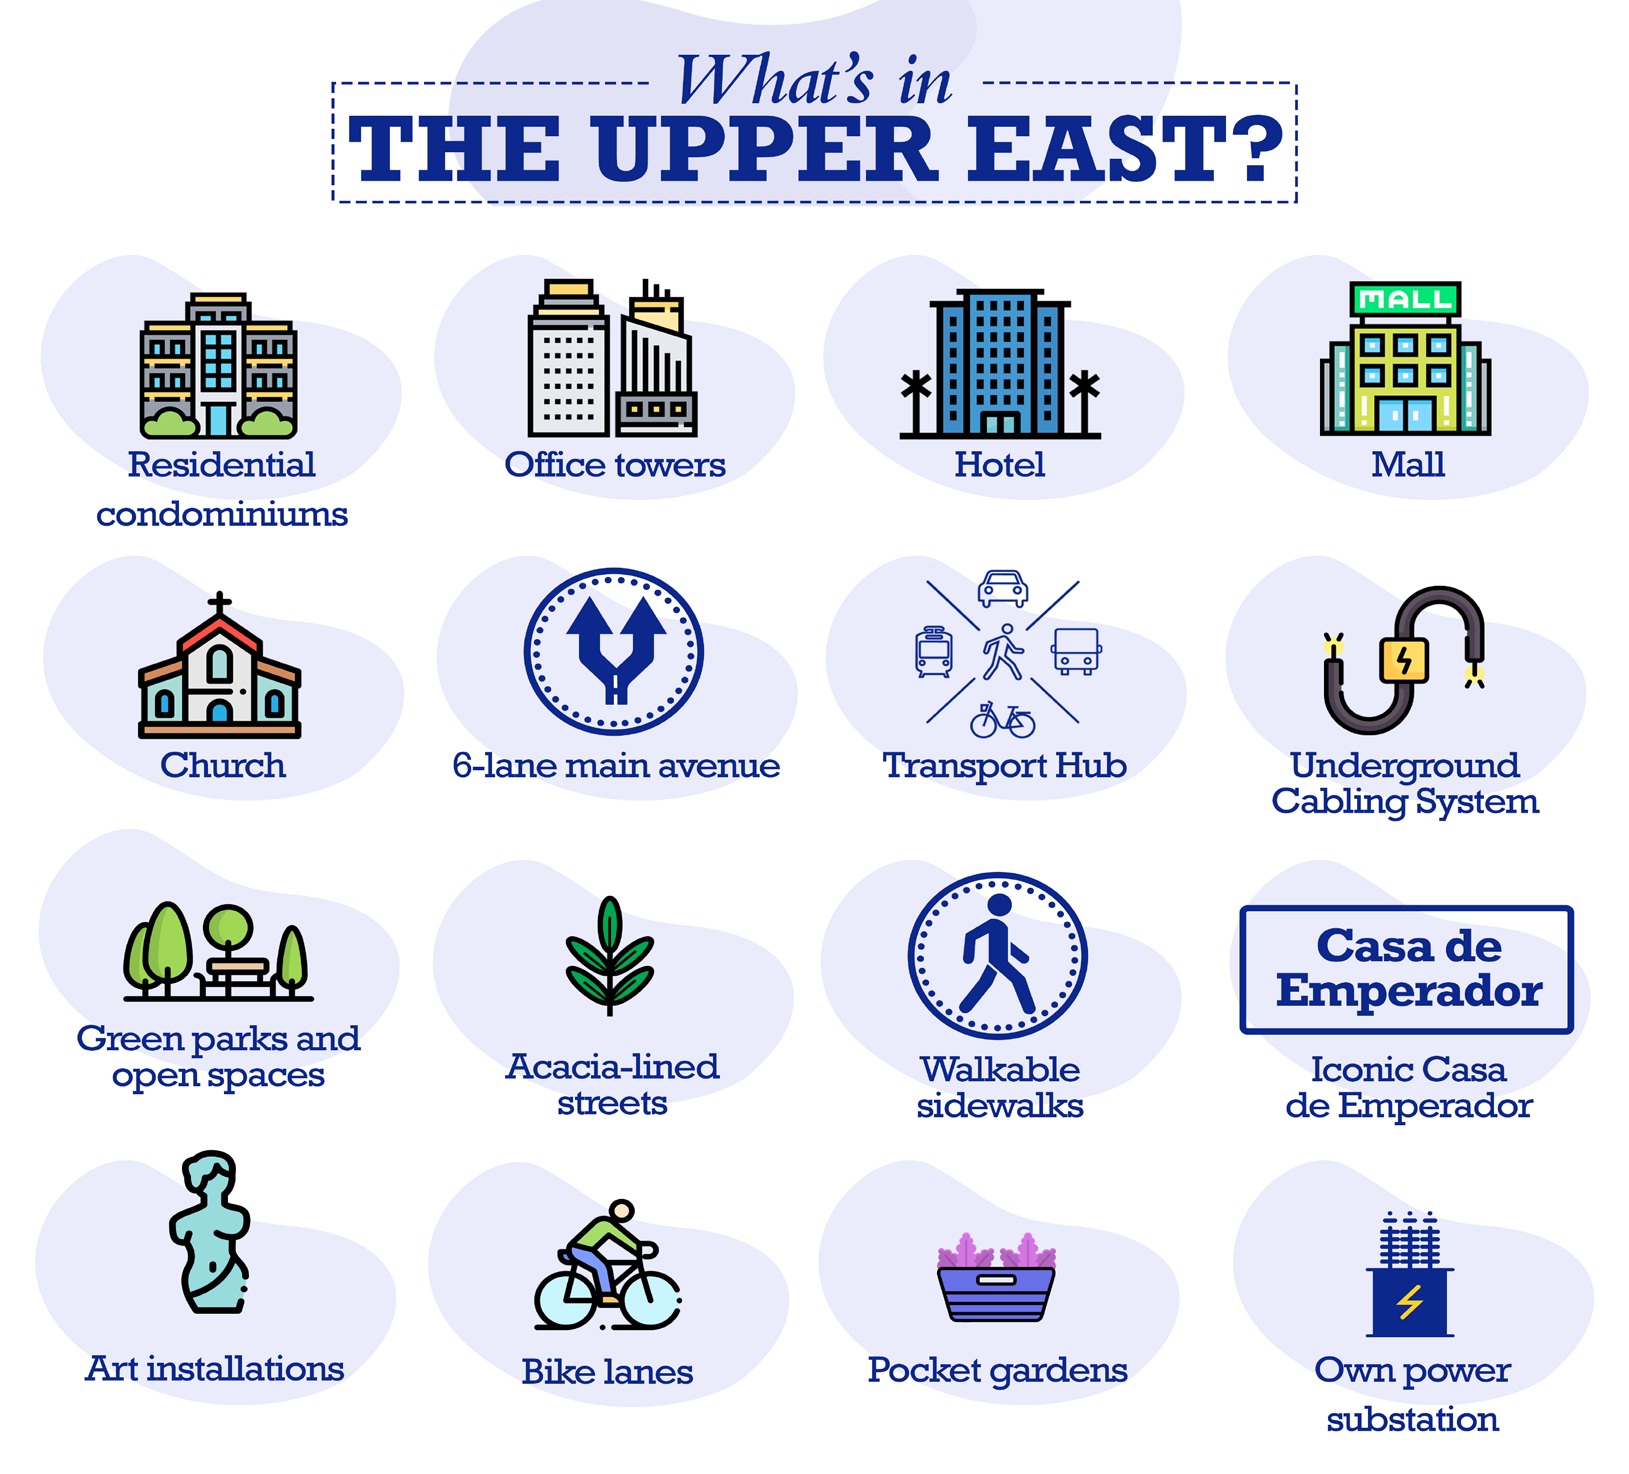 The Upper East Infographic